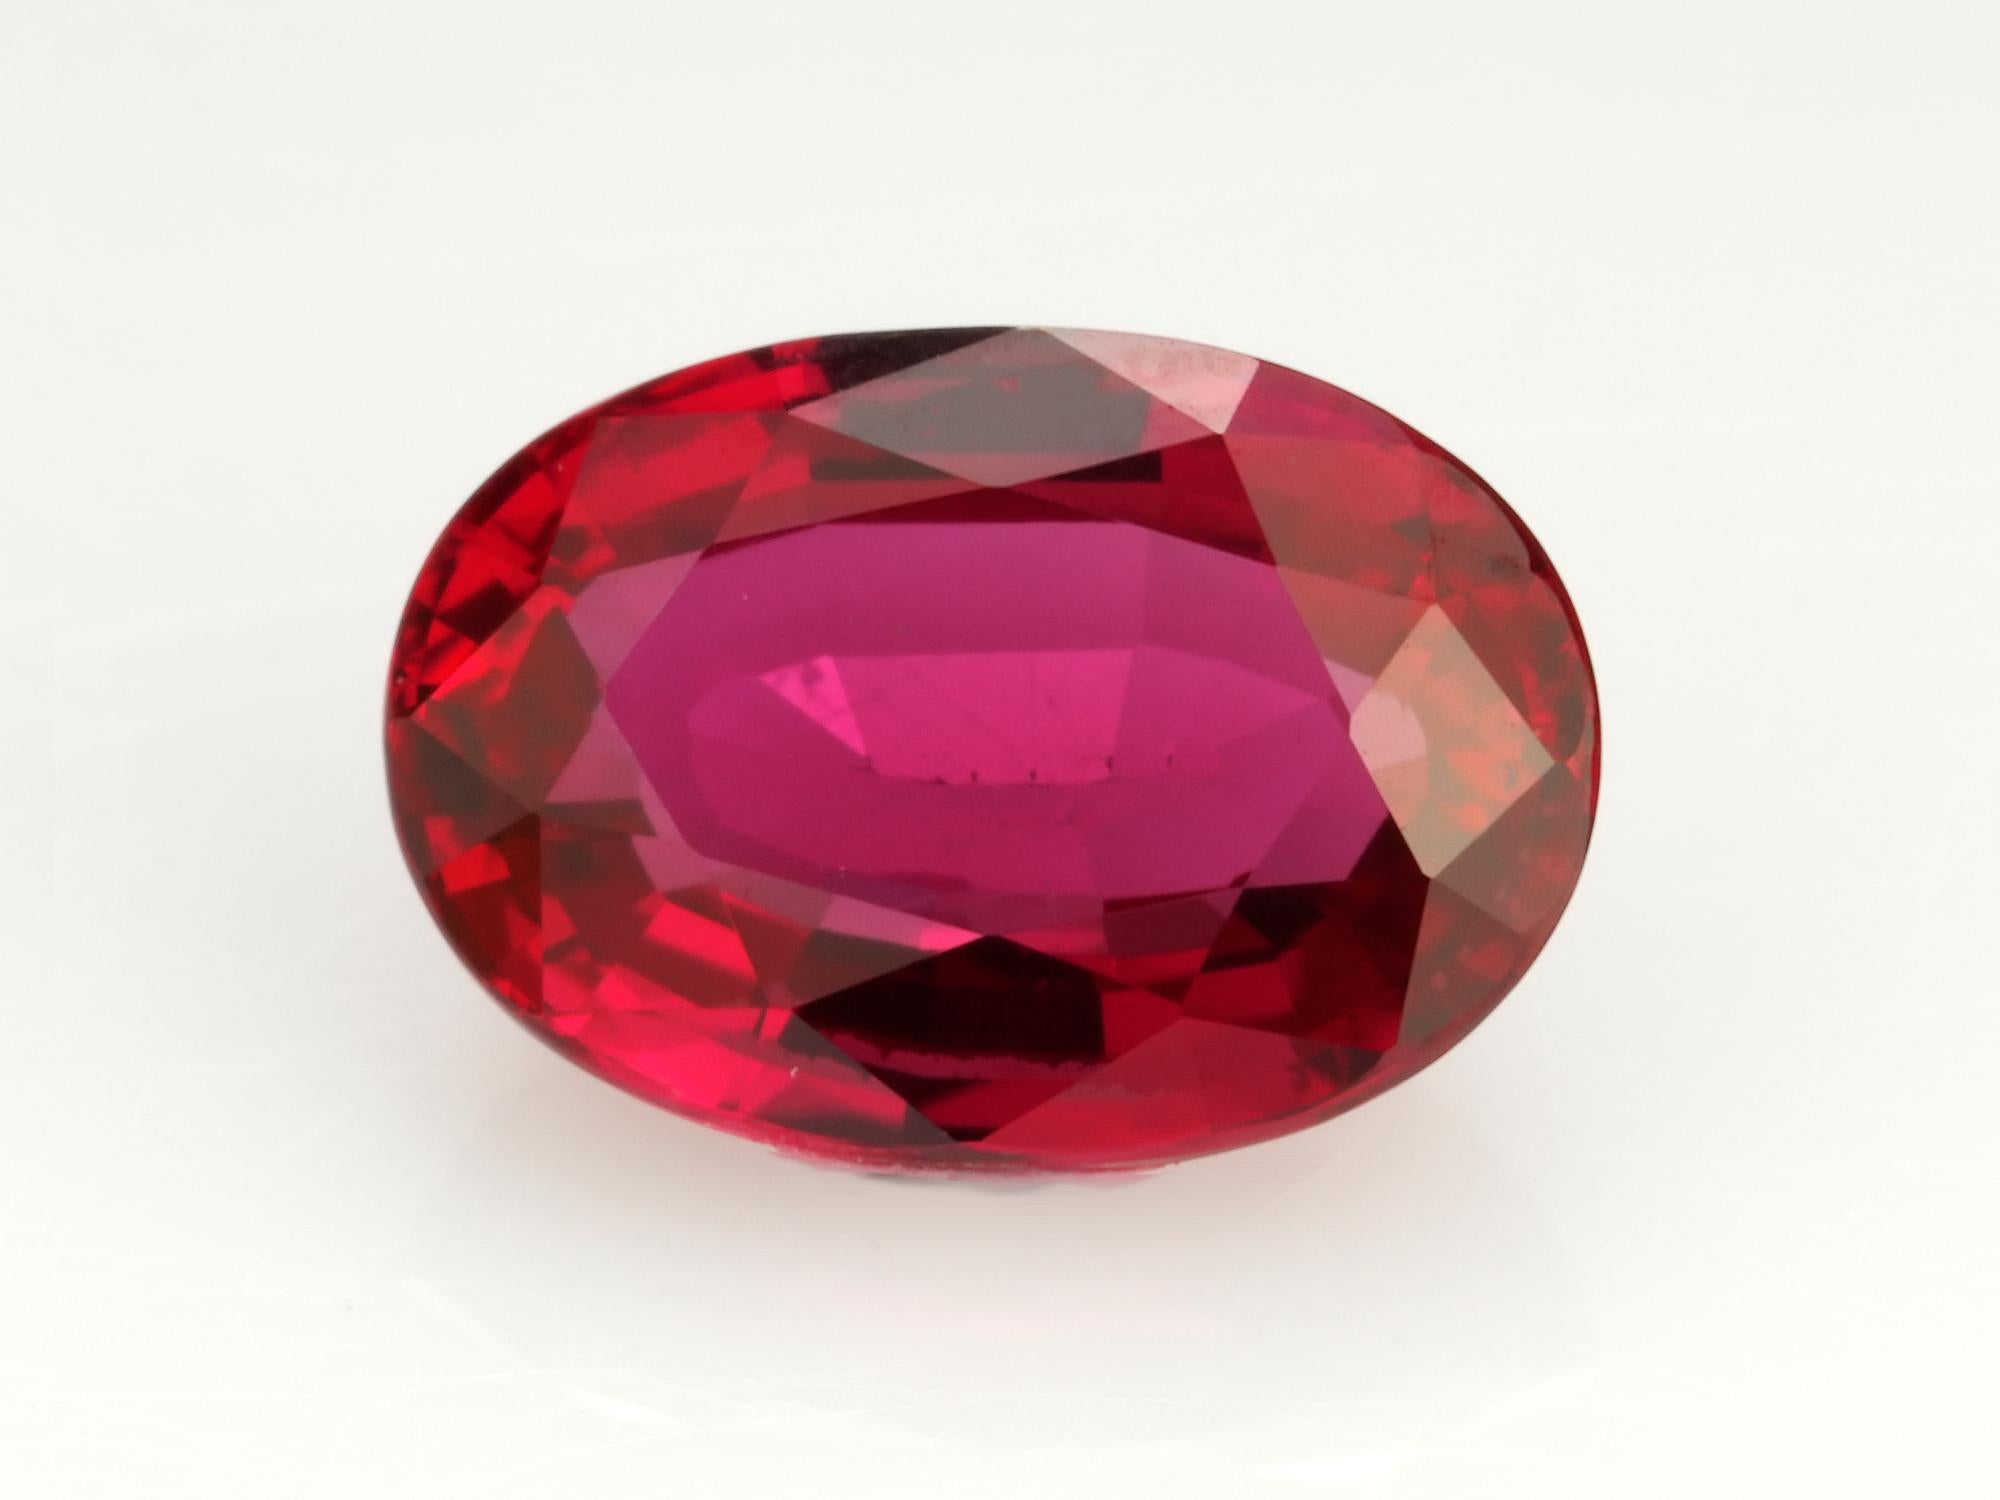 Ruby
Oval Shape
Color Red
Brilliant/Step Cut
Dimension 4.40x6.37x2.67
Weight 0.731 cts.

GEM RARITY: UNEARTHLY THE RAREST GEM

Witness the unique journey of colored gemstones, experience a new level of iconic statements and innovation.

GEM RARITY